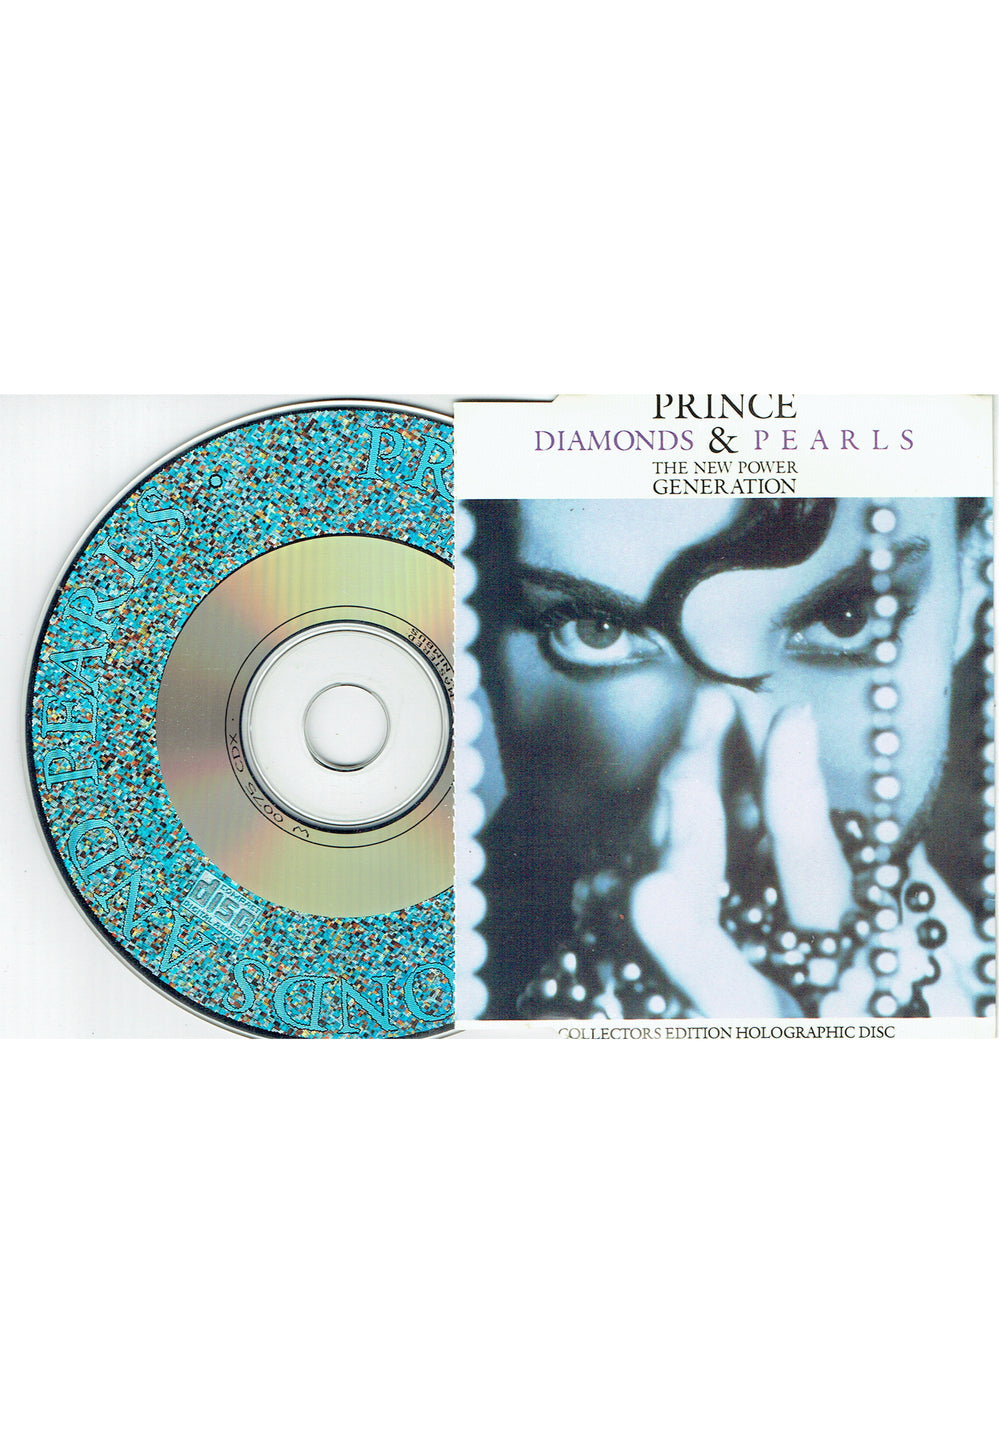 Prince – & The New Power Generation - Diamonds & Pearls CD Single Holographic Europe Preloved: 1991